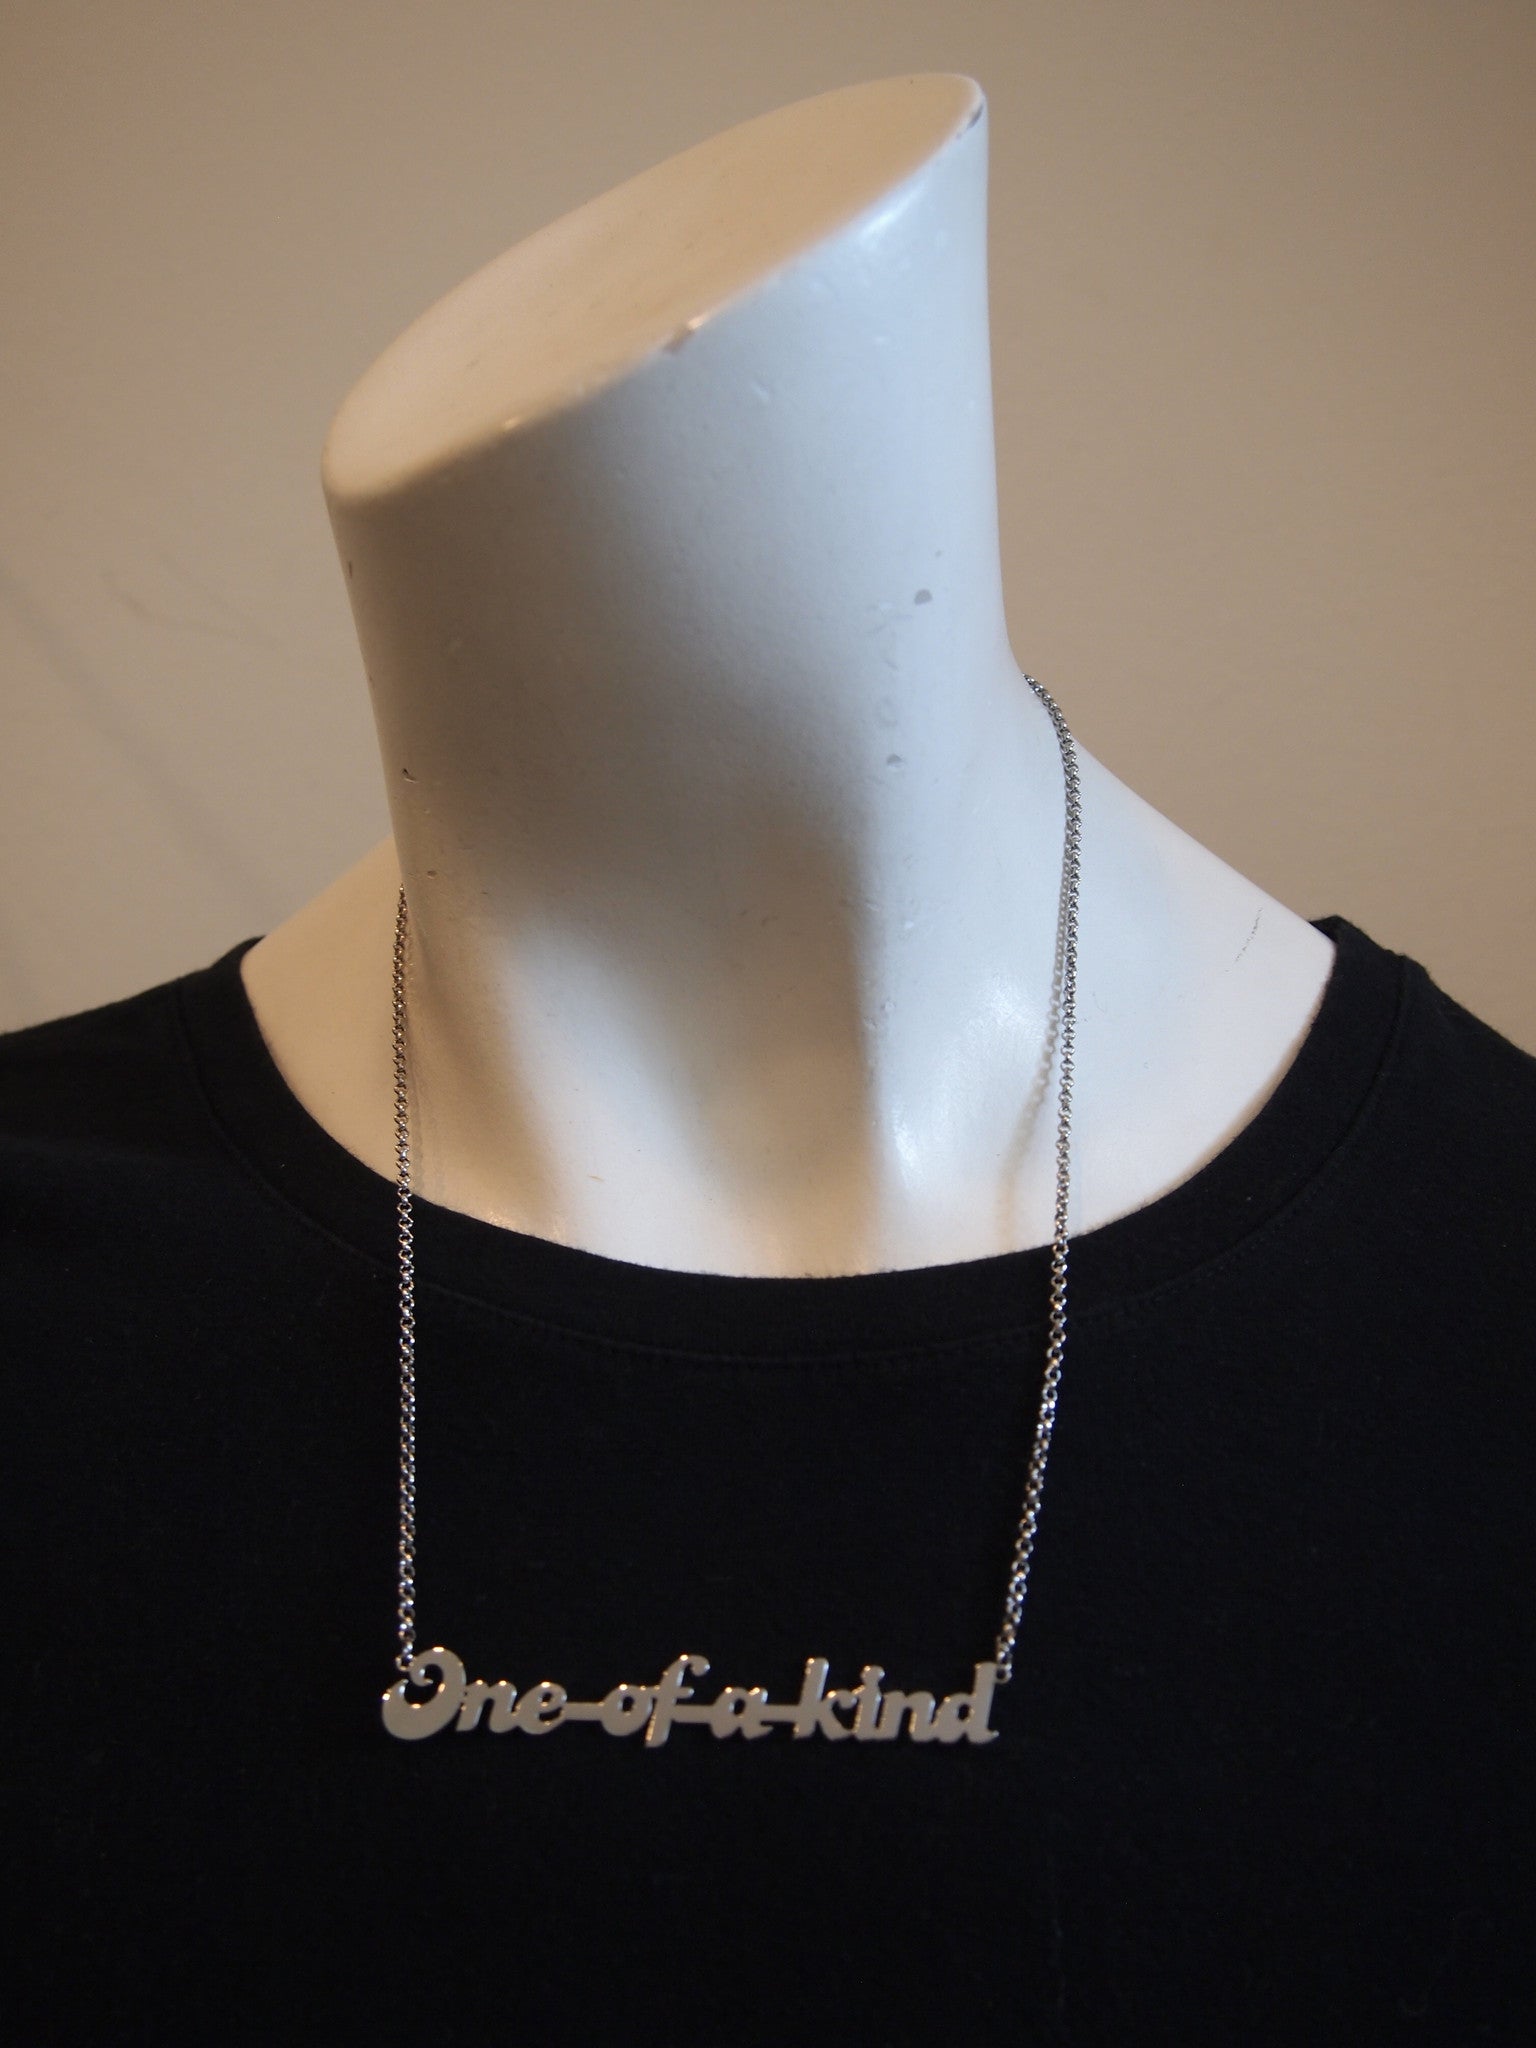 Handcut Nameplate Necklace - One-of-a-Kind